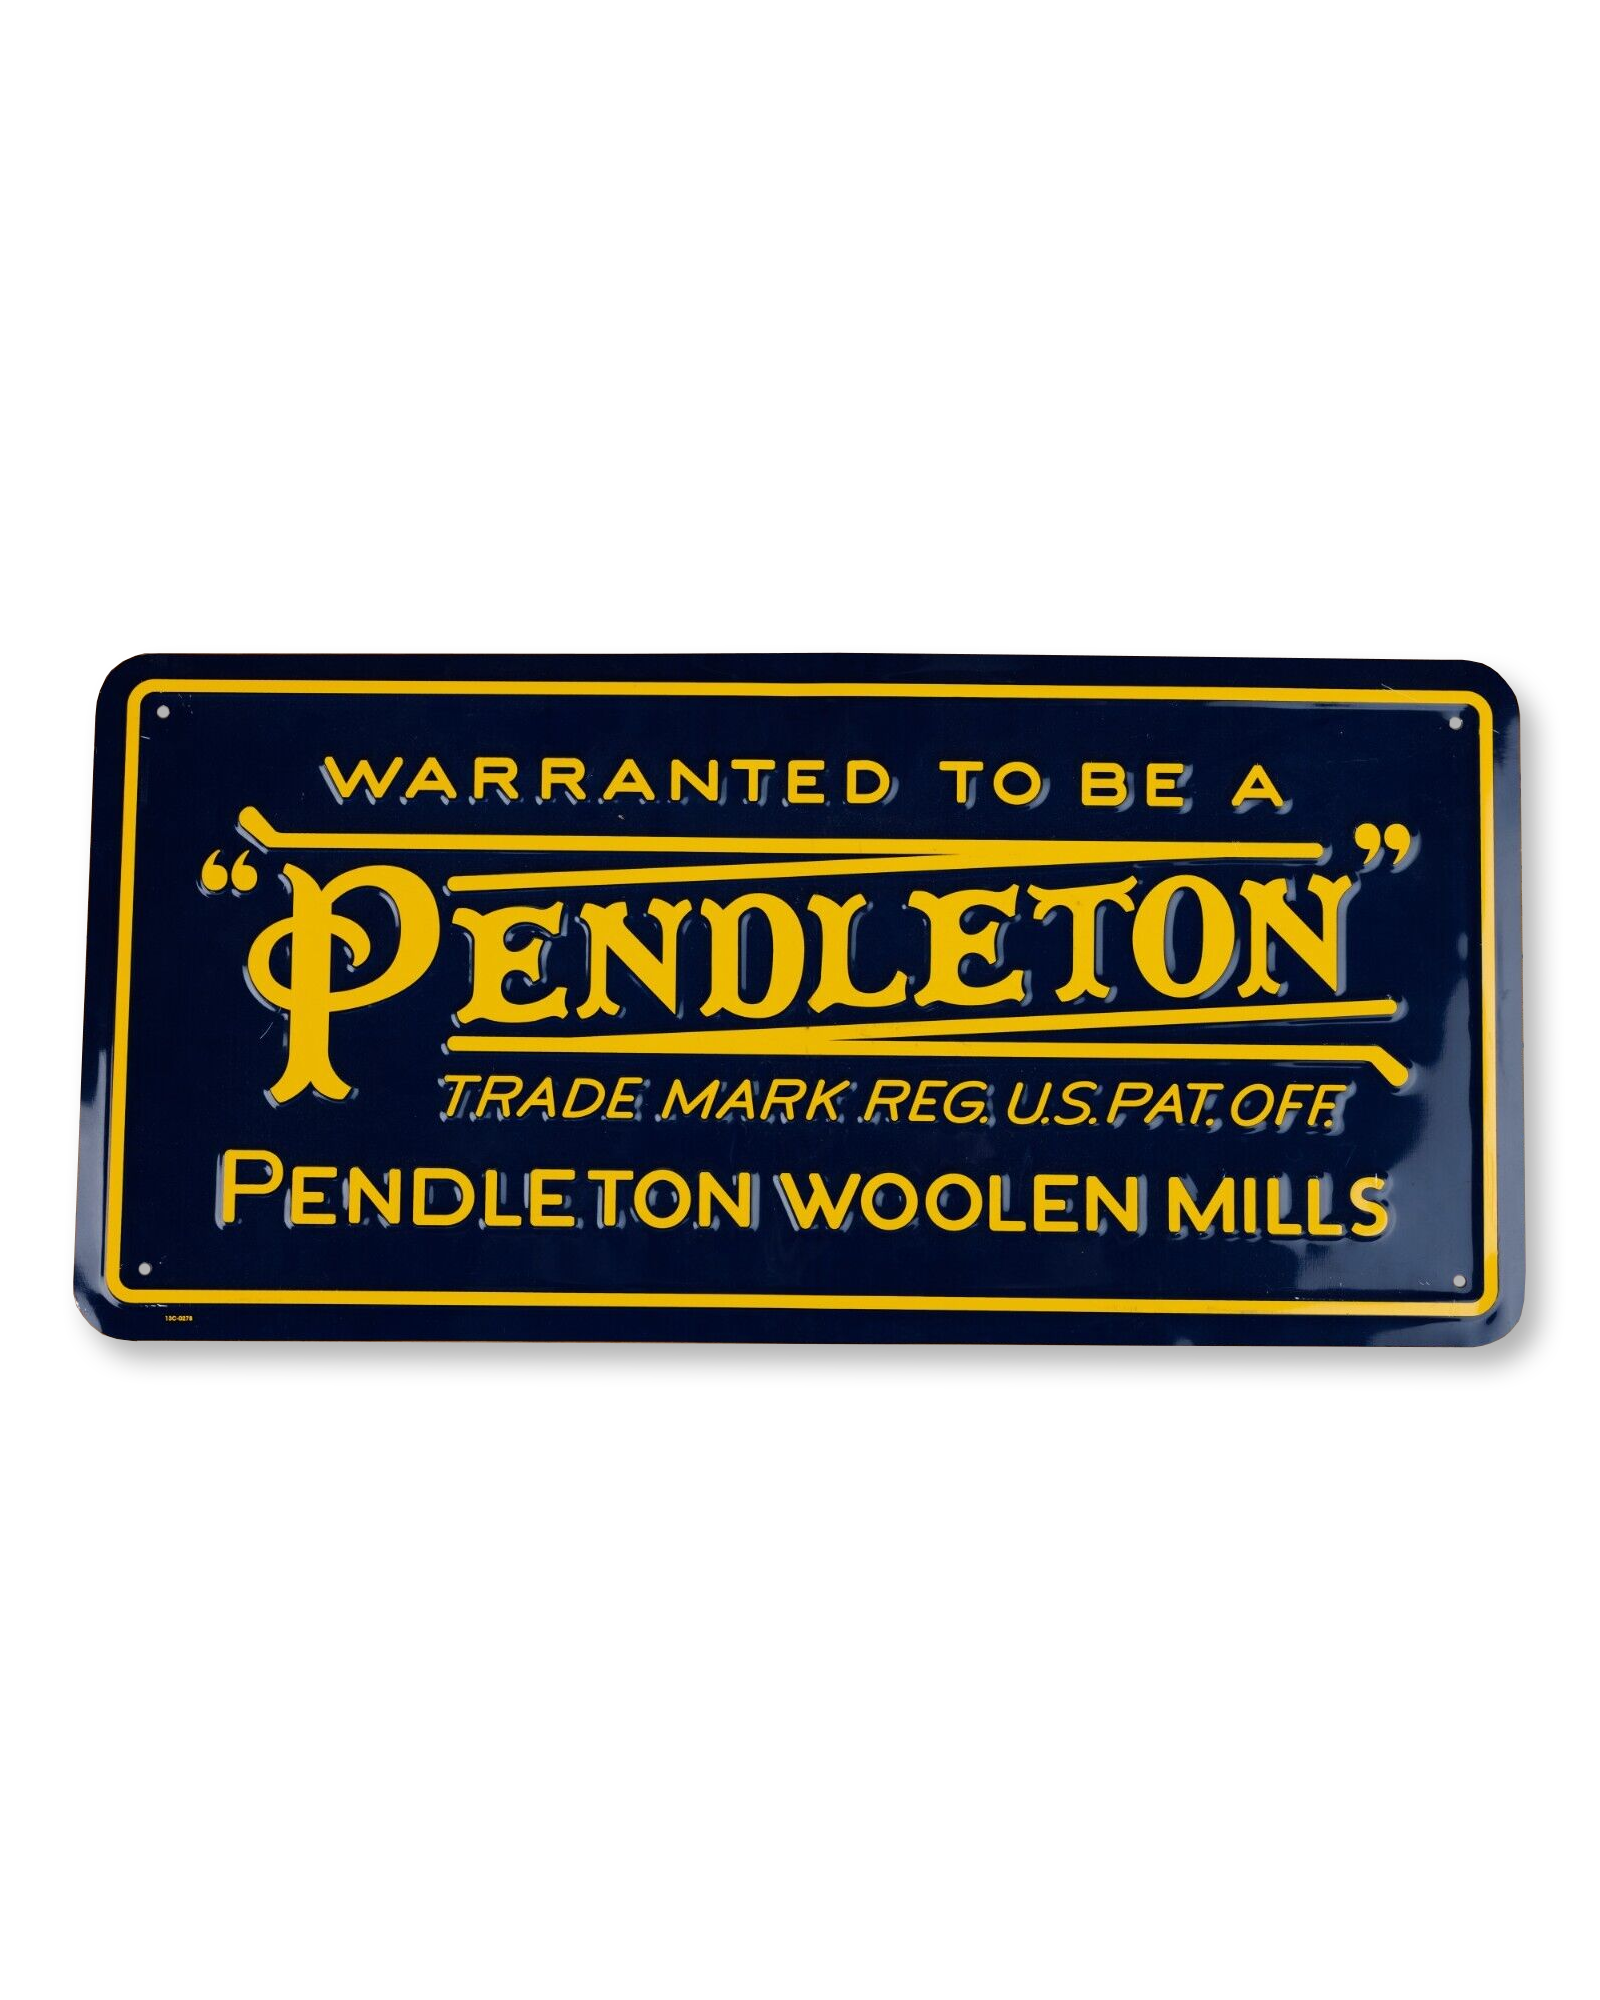 Get Outdoors With The Stanley x Pendleton Collection - COWGIRL Magazine